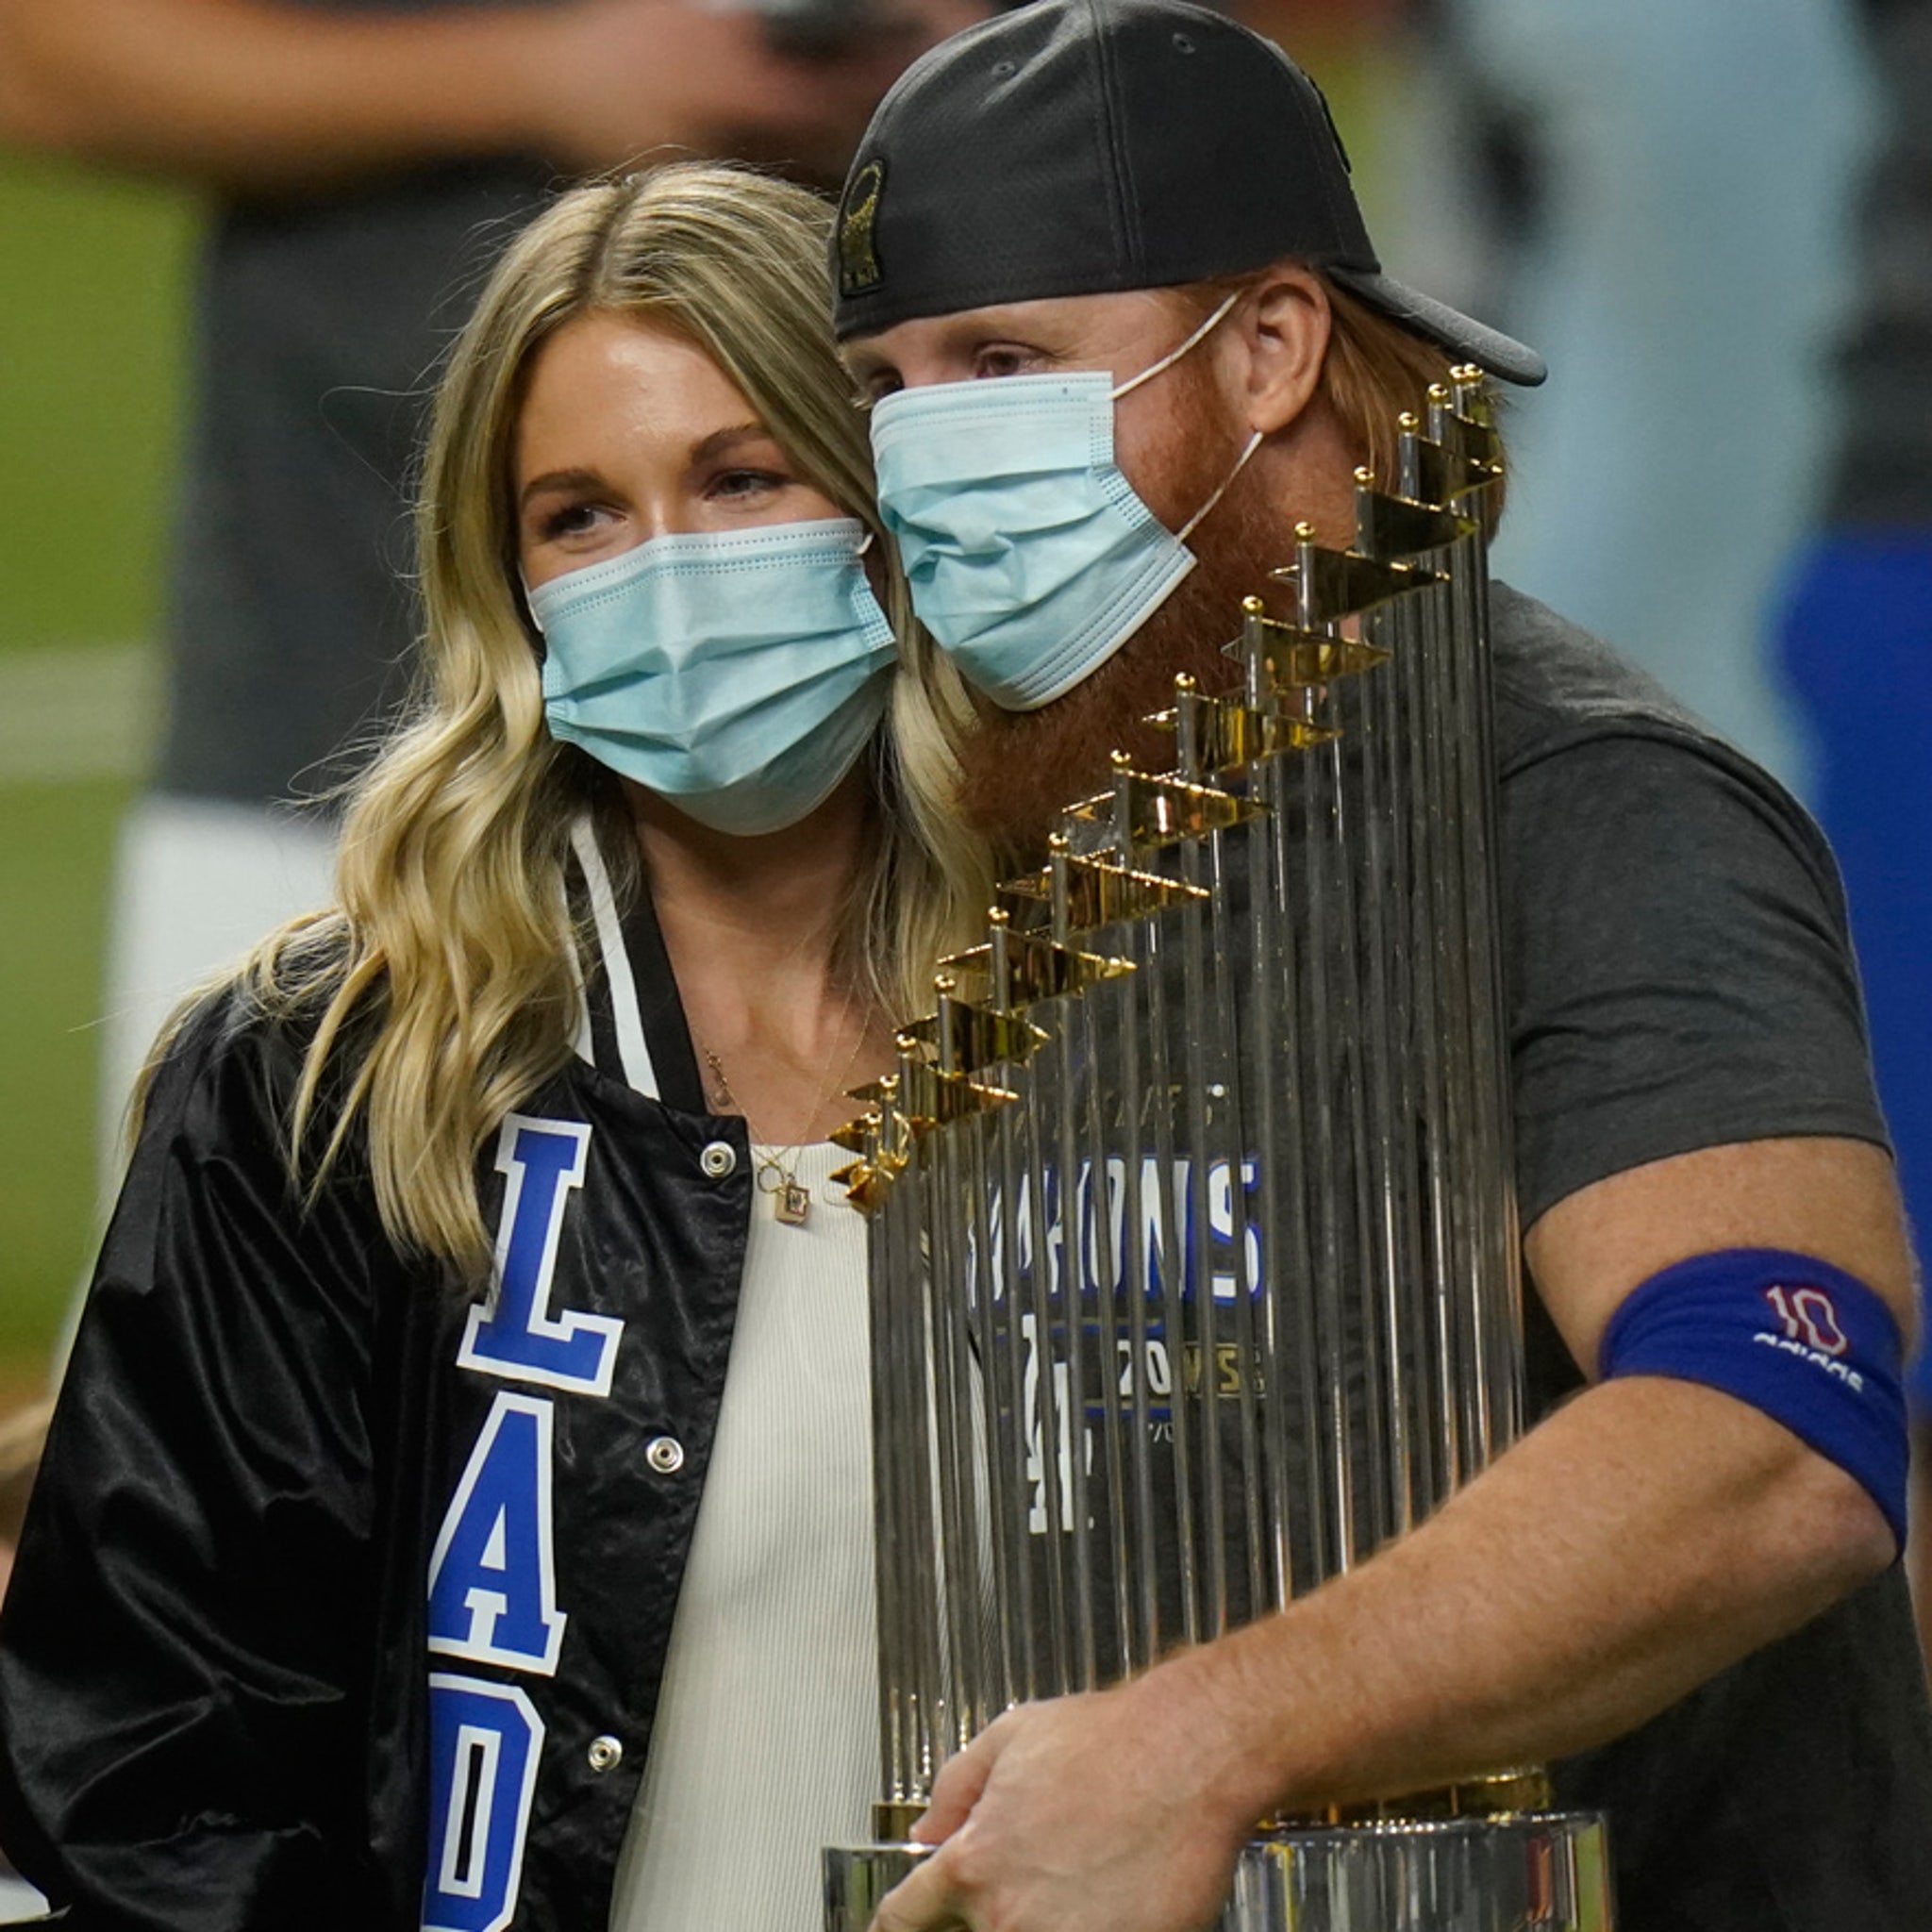 L.A. Dodgers Postponing Championship Parade Due To Pandemic